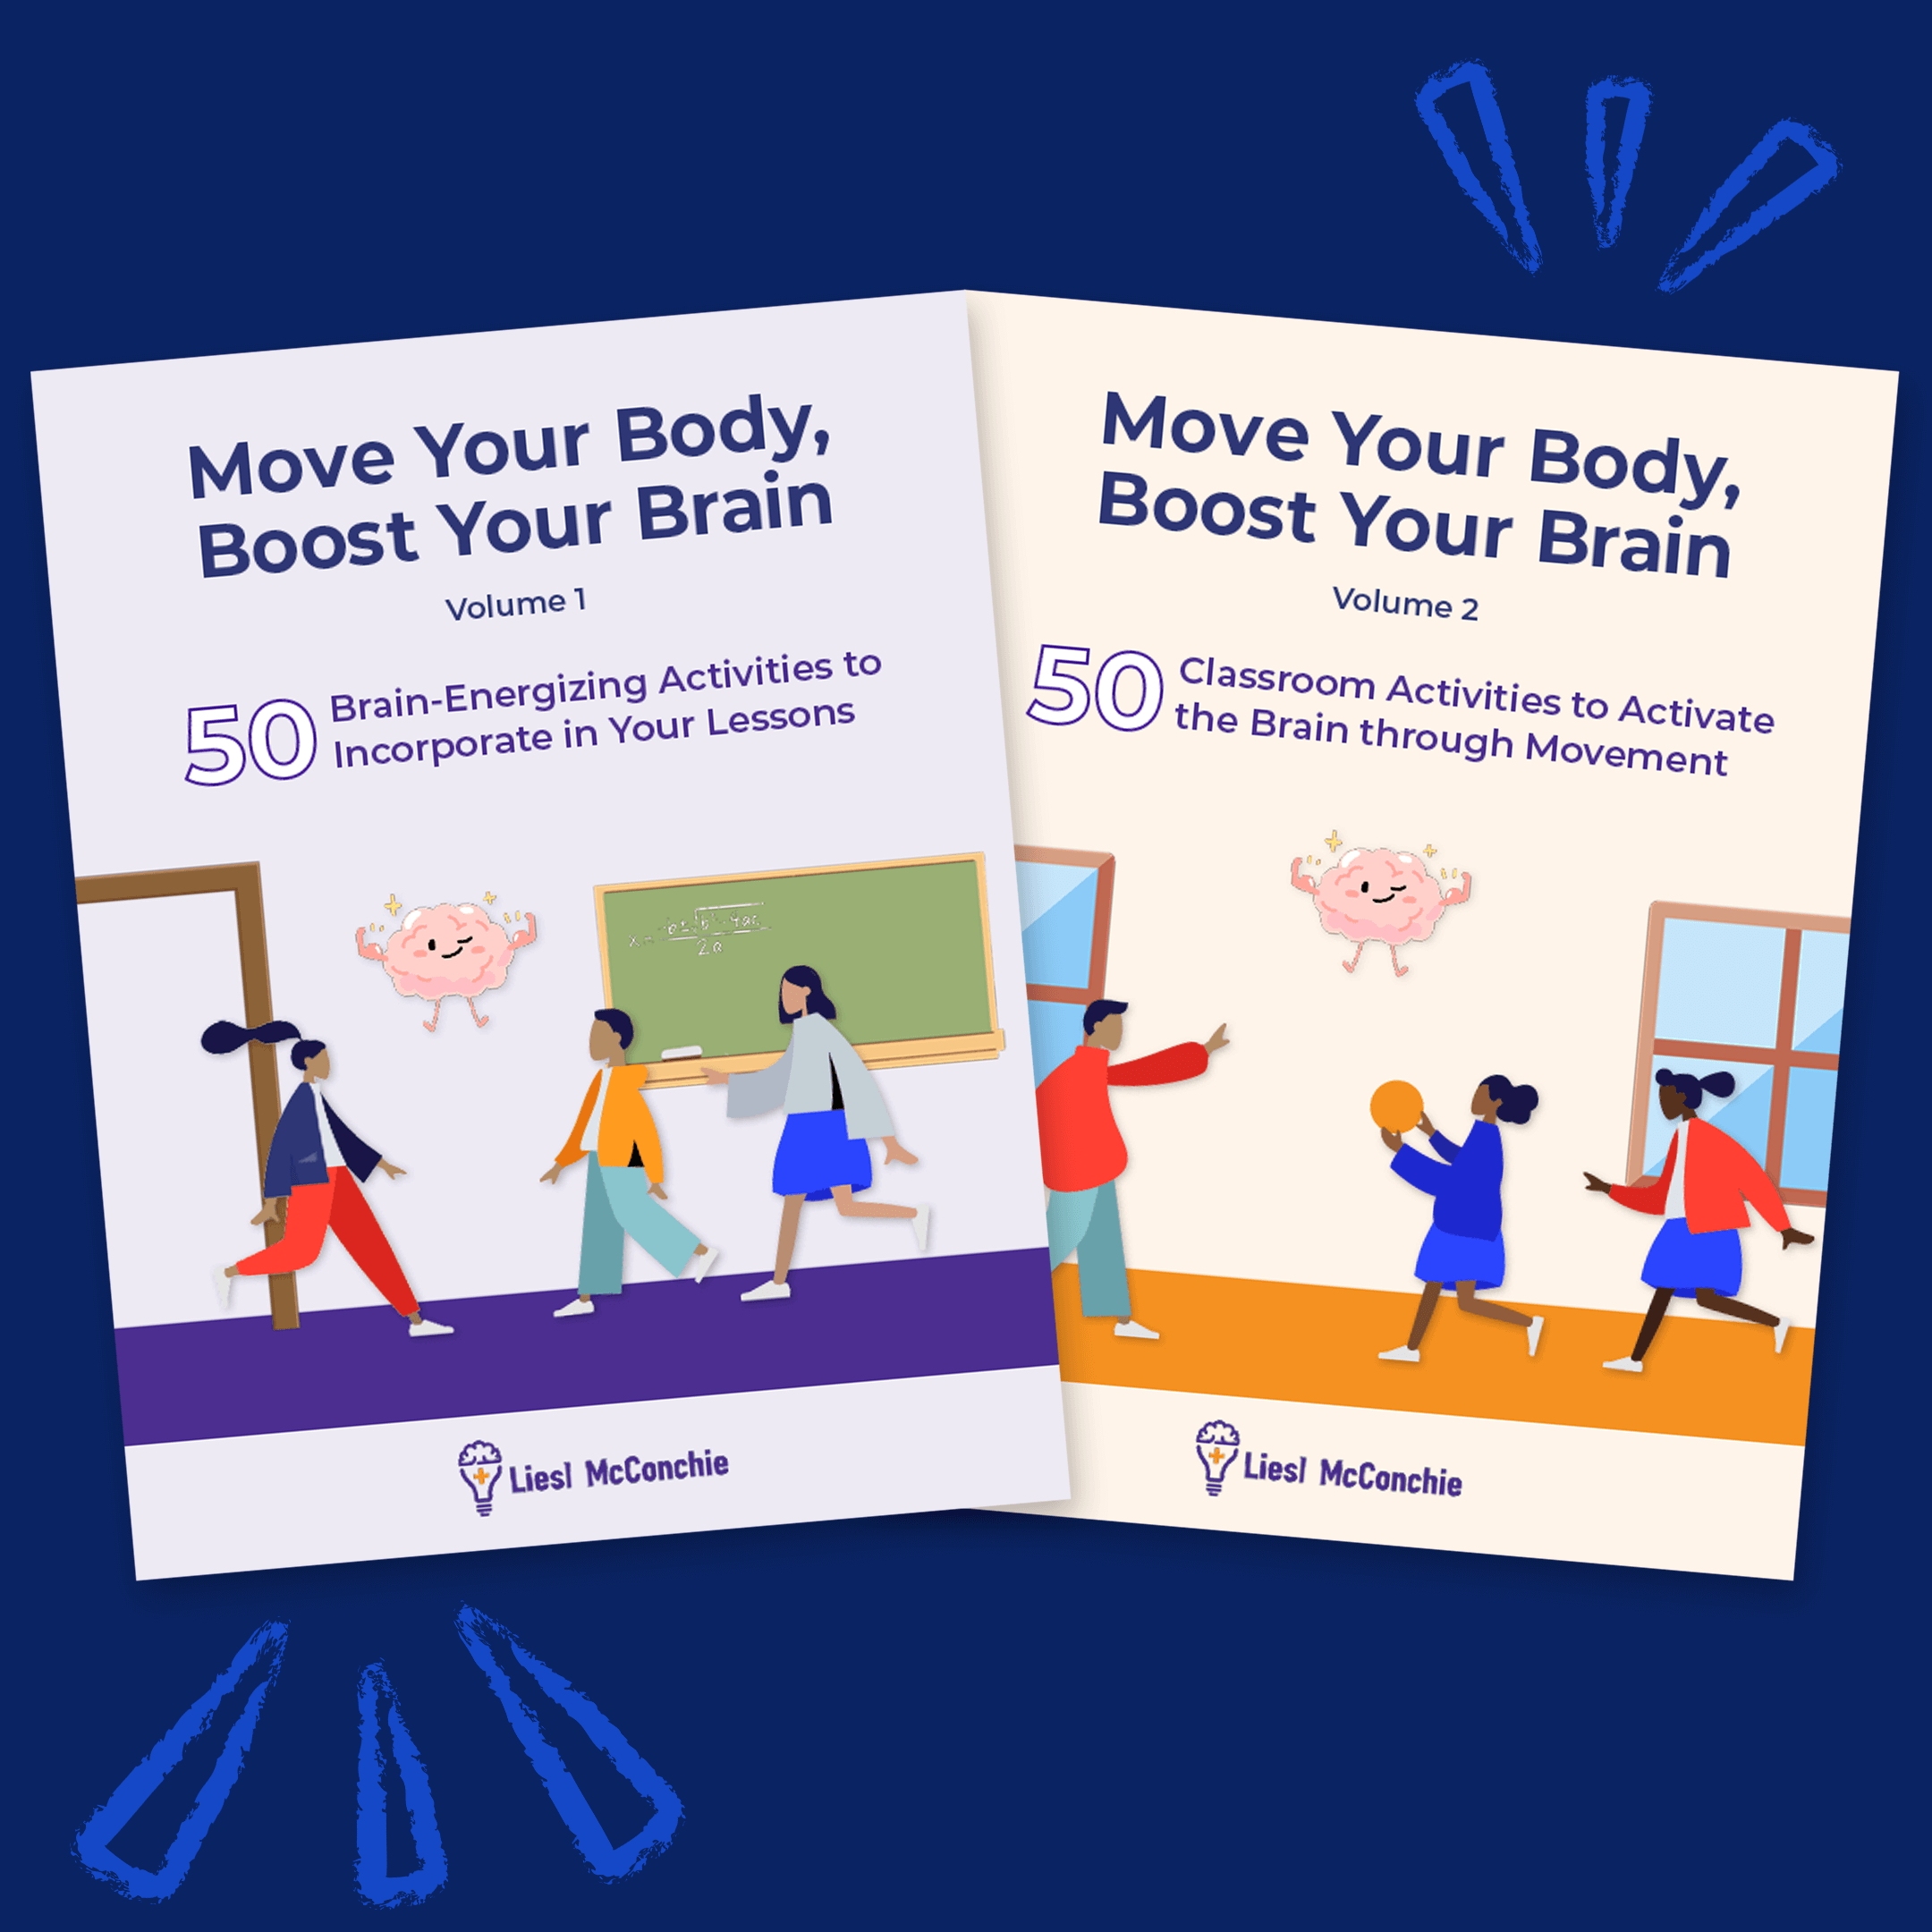 Both volumes of Move Your Body, Boost Your Brain in a lower-cost bundle.